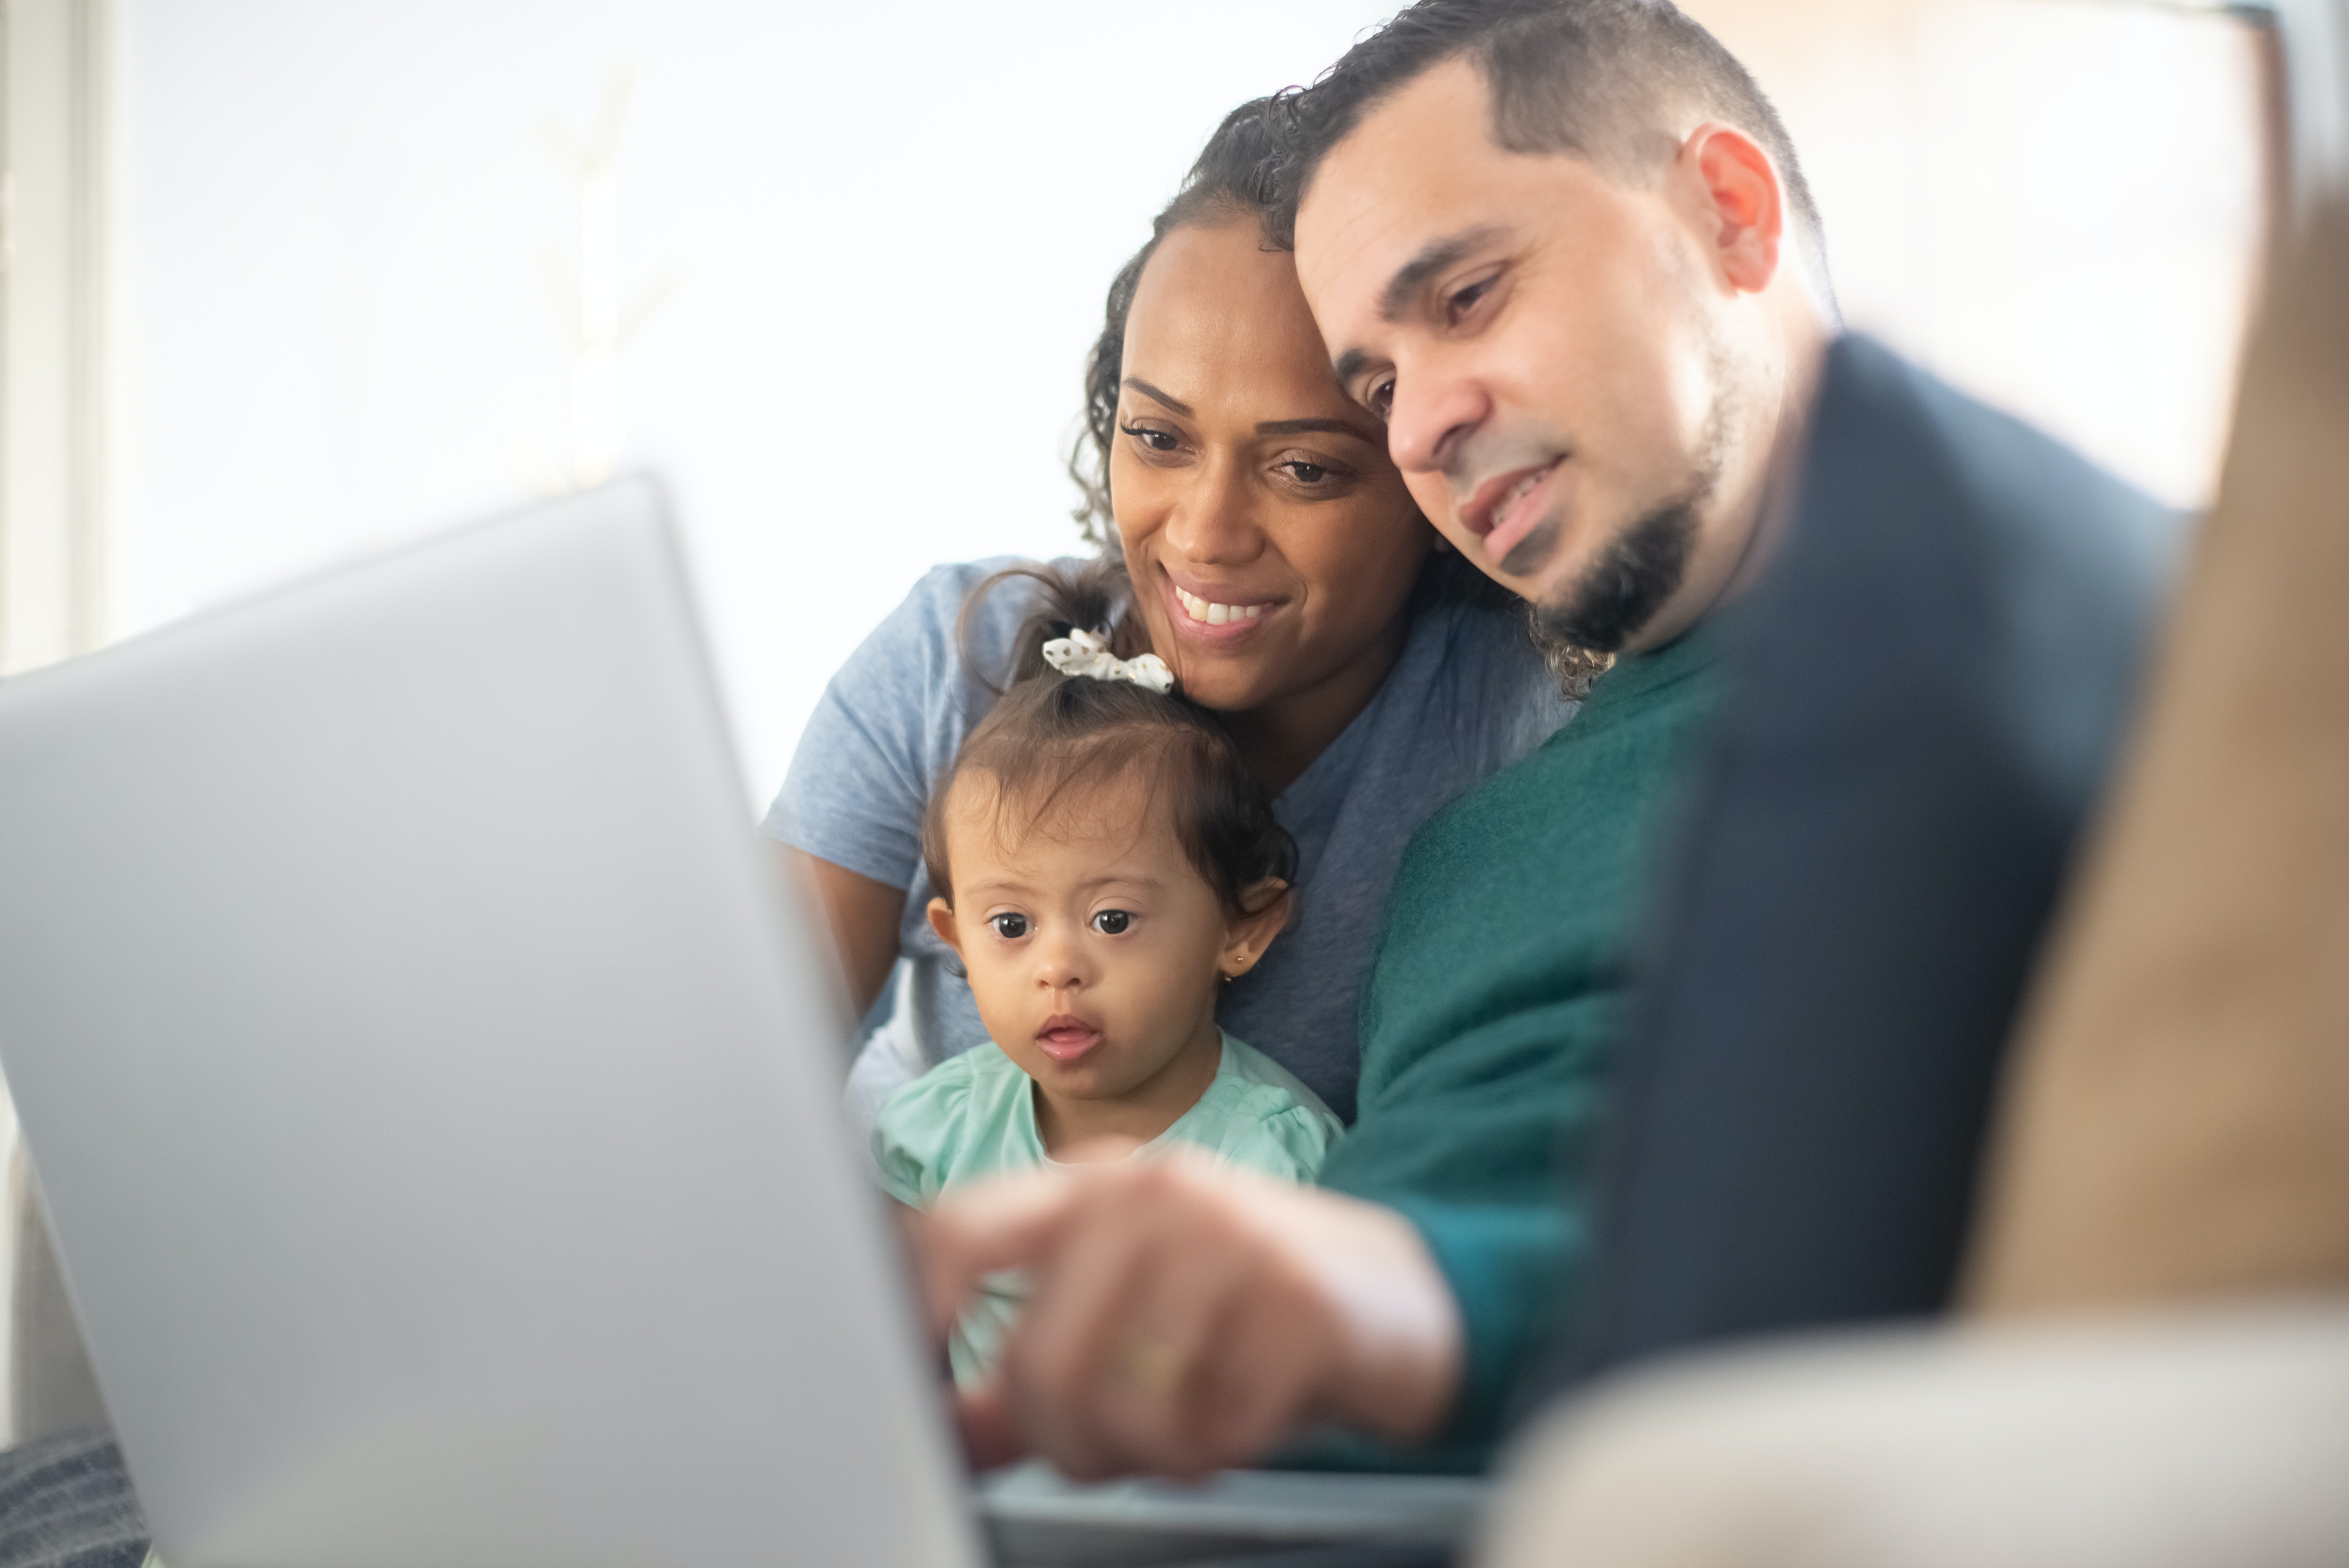 Two parents sit together in front of a laptop. Their baby sits on the mother's lap and stares at the screen while the father points at the screen.